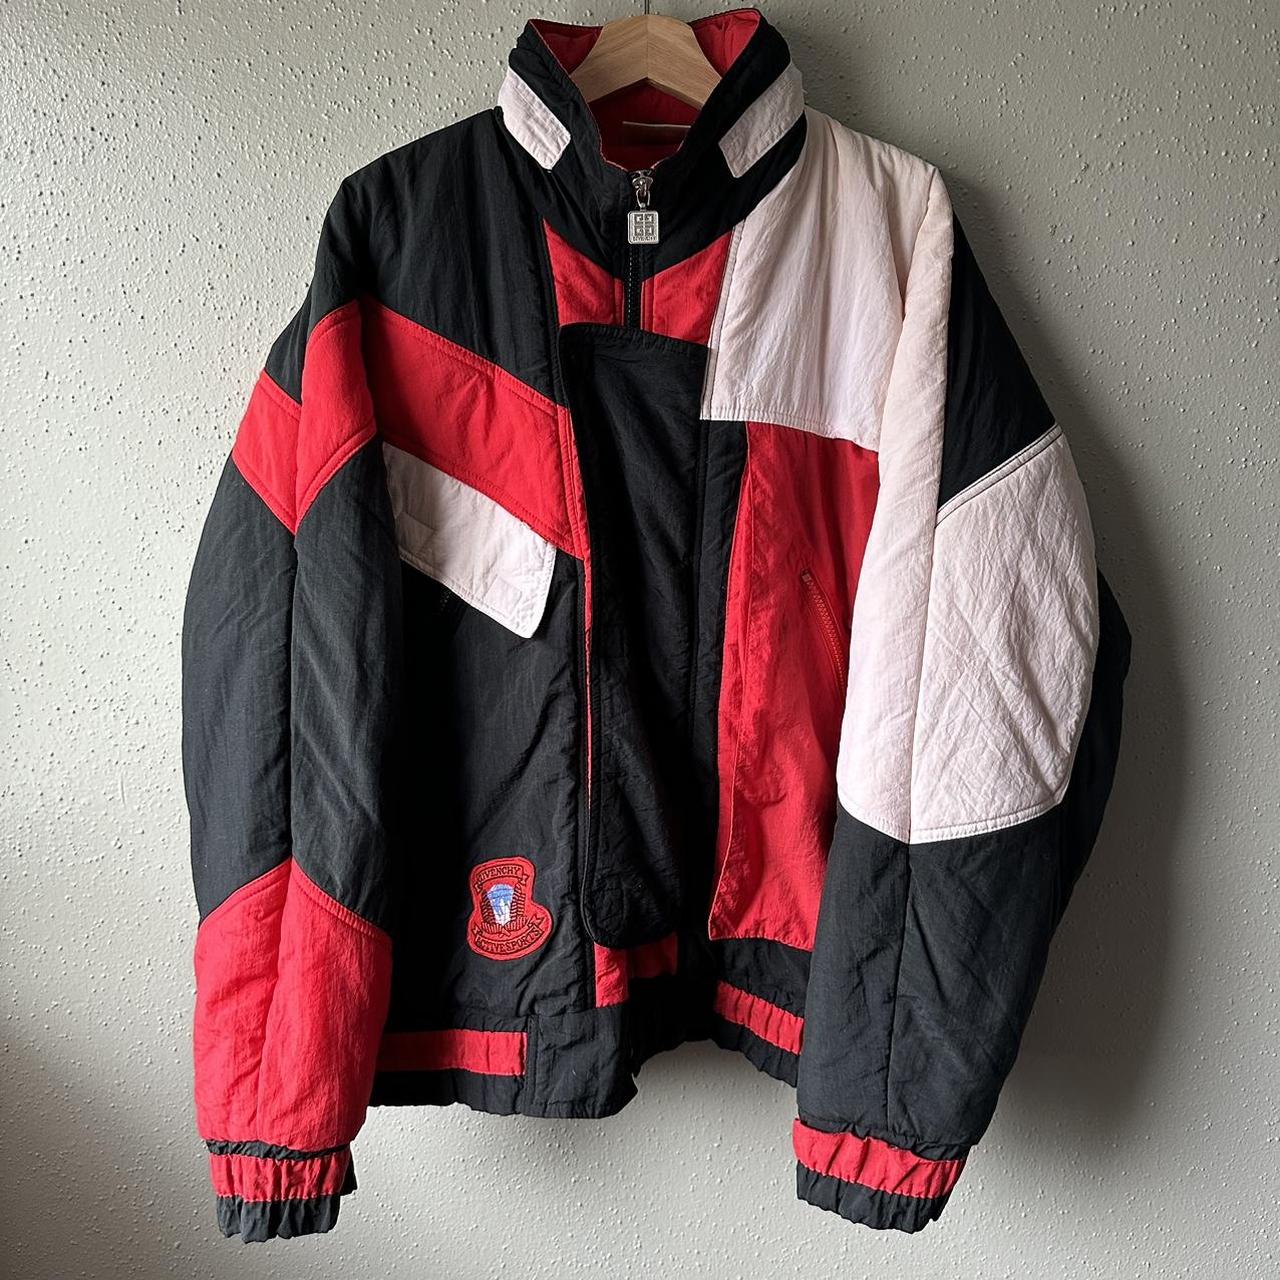 Givenchy active sports jacket in used condition with... - Depop